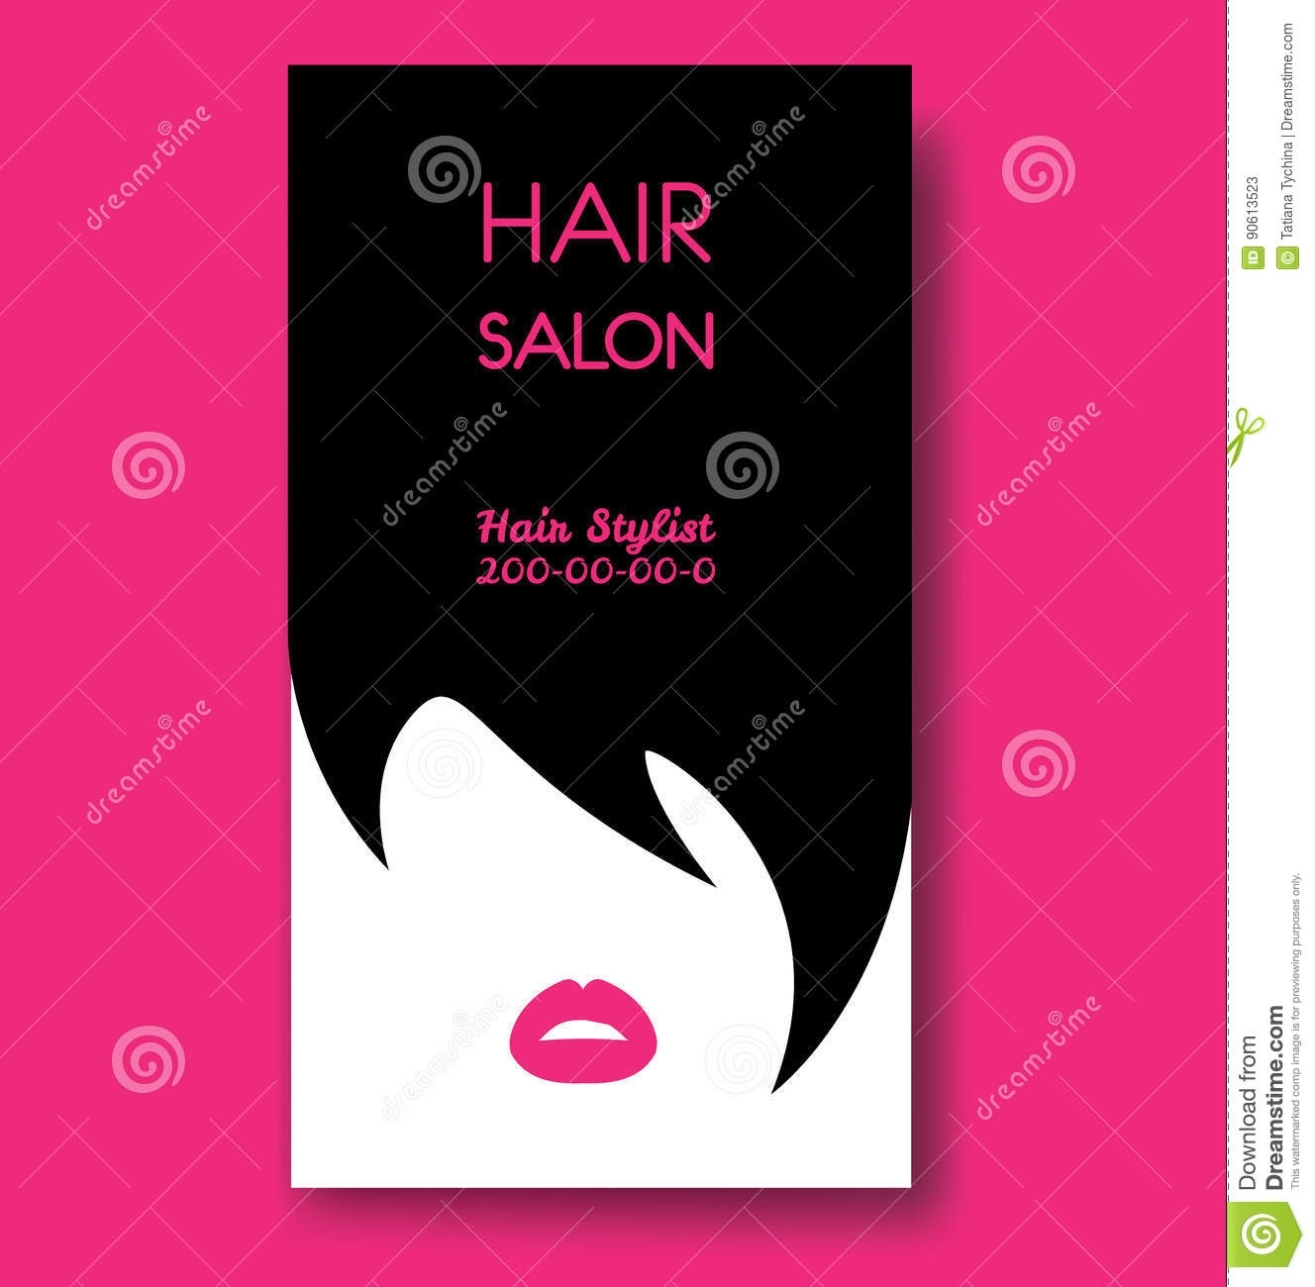 Hair Salon Business Card Templates With Black Hair And Beautiful Stock Vector – Illustration Of For Hair Salon Business Card Template